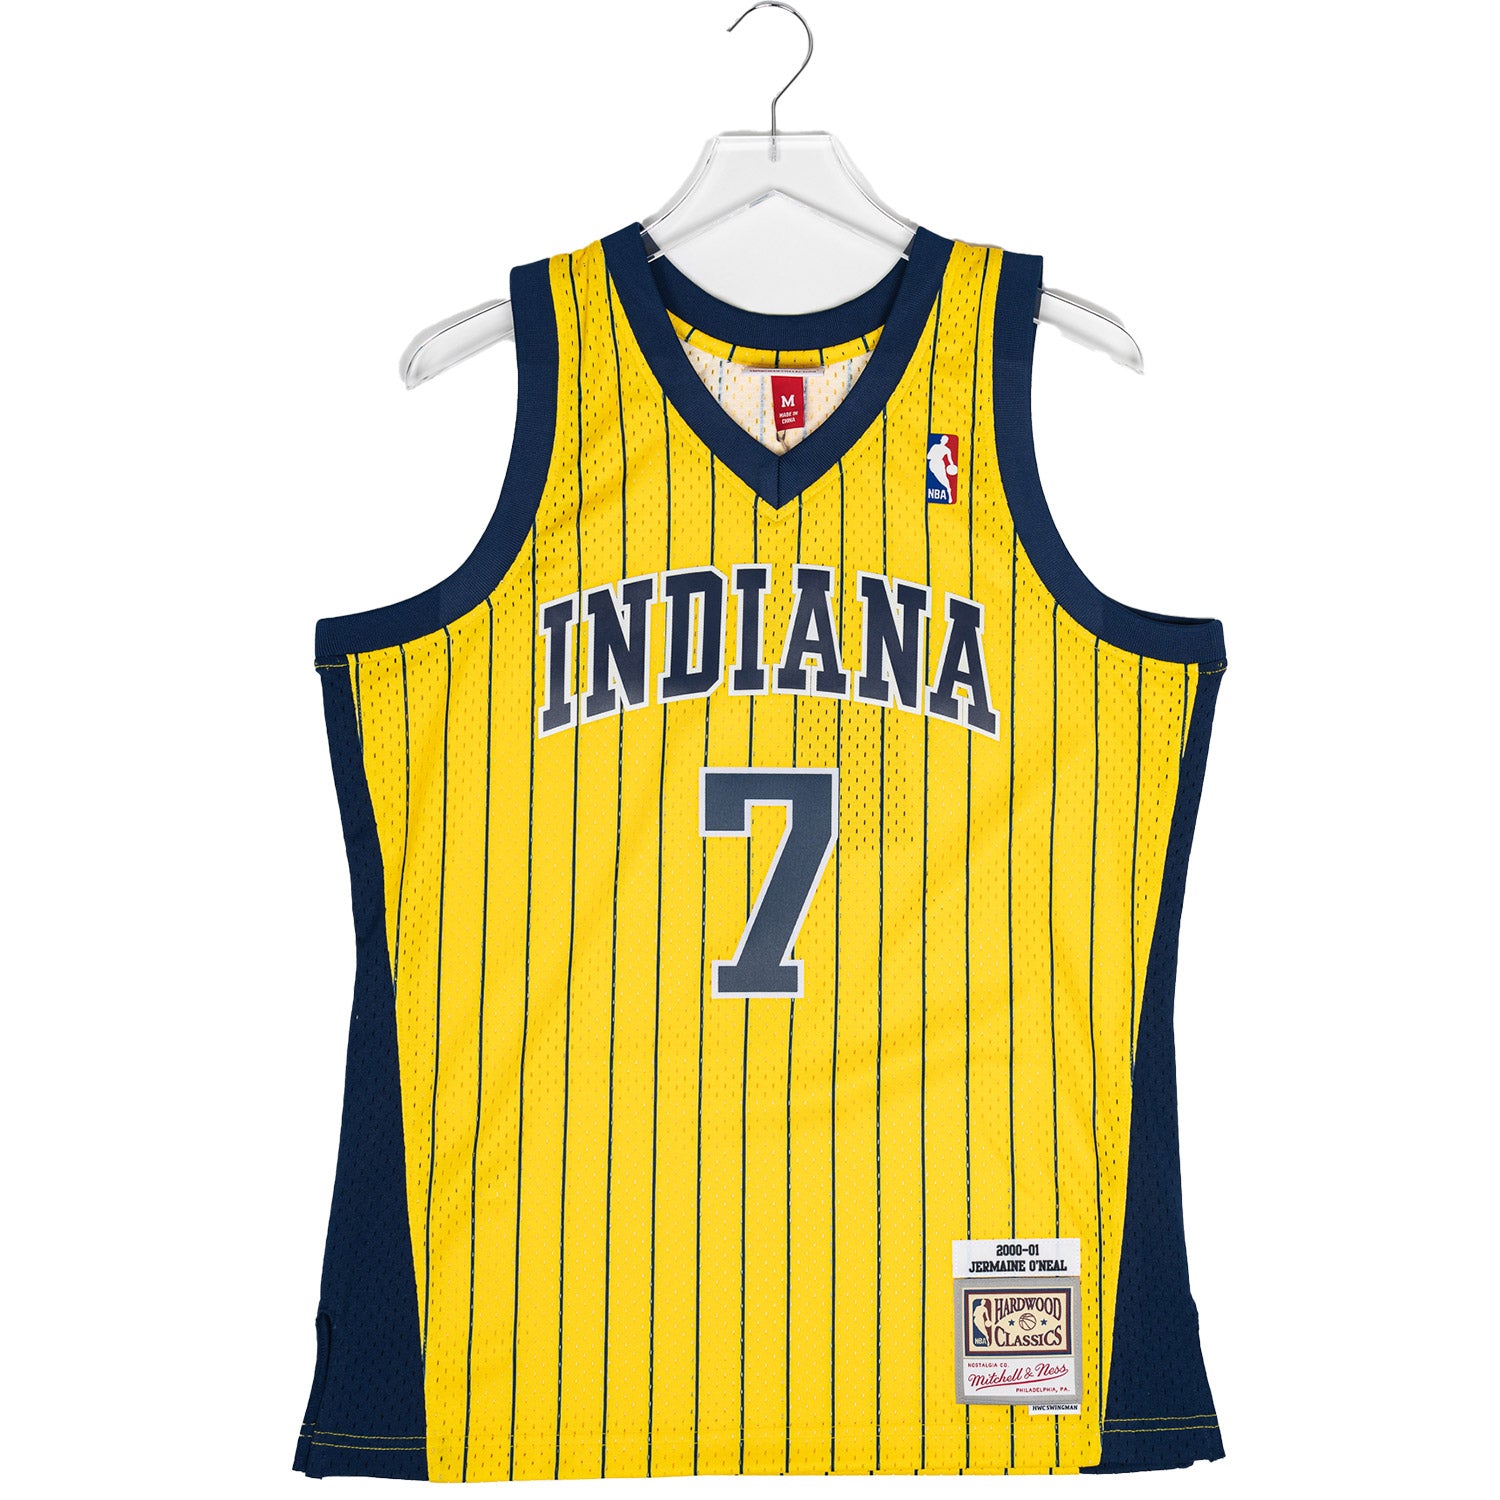 Indiana Pacers Jerseys, Hoodies, T-Shirts and More - Pacers Store